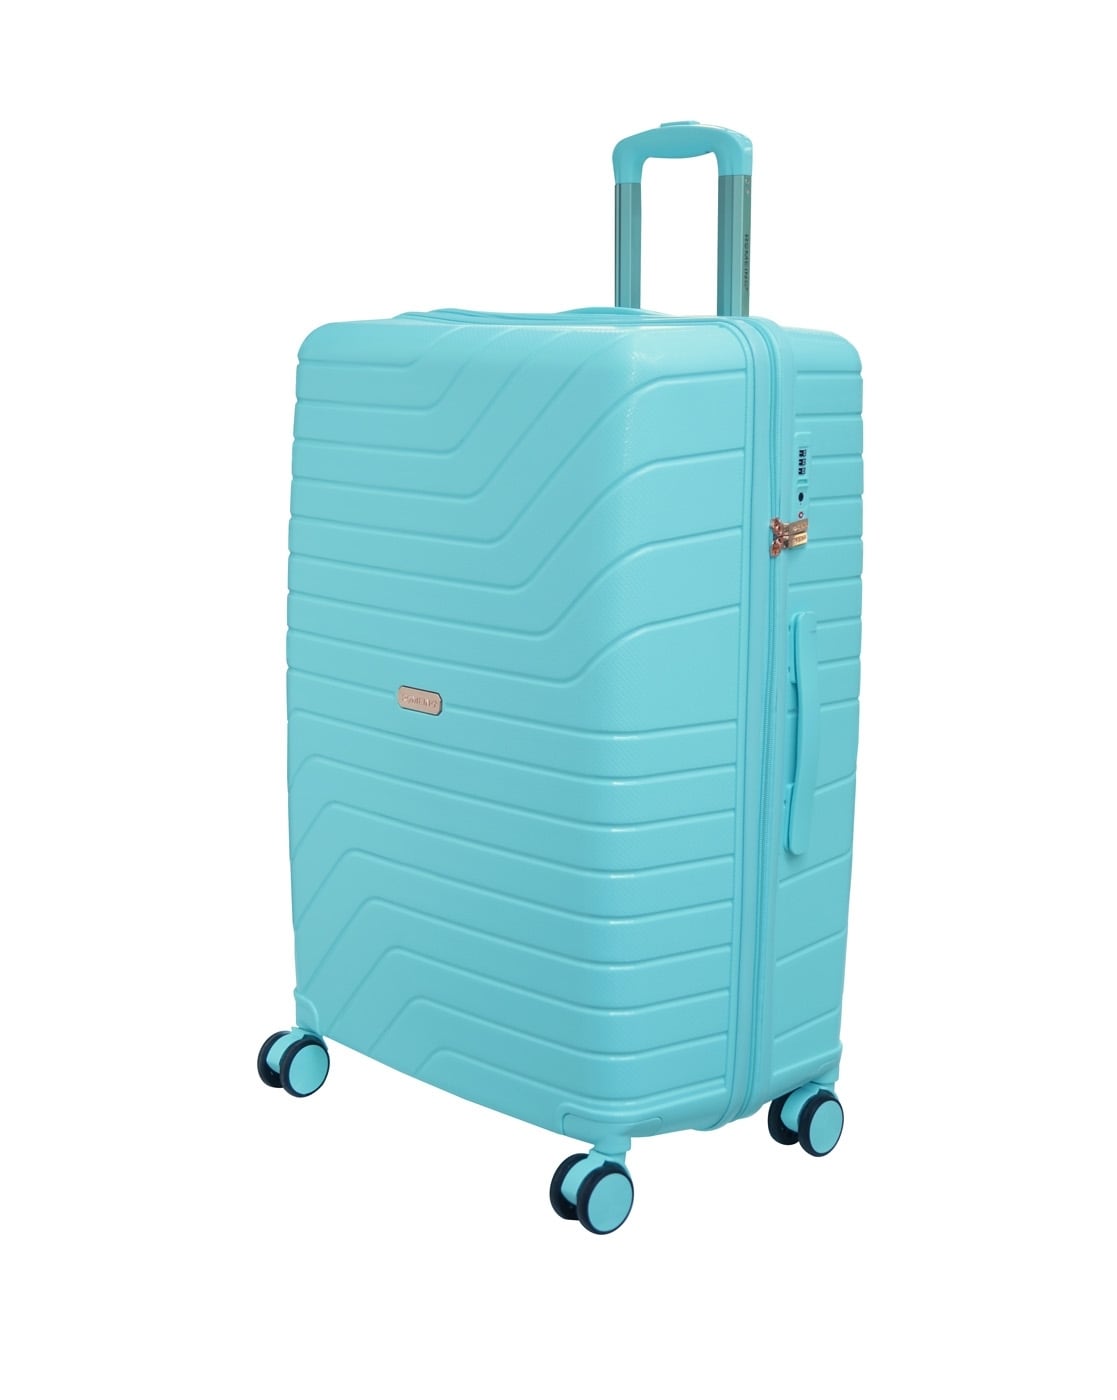 ROMEING Tuscany 20,24,28 inch, Polypropylene Luggage, Sky Blue 55, 65, 75  cm Trolley Bag Cabin & Check-in Set 8 Wheels - 28 inch Sky Blue - Price in  India | Flipkart.com